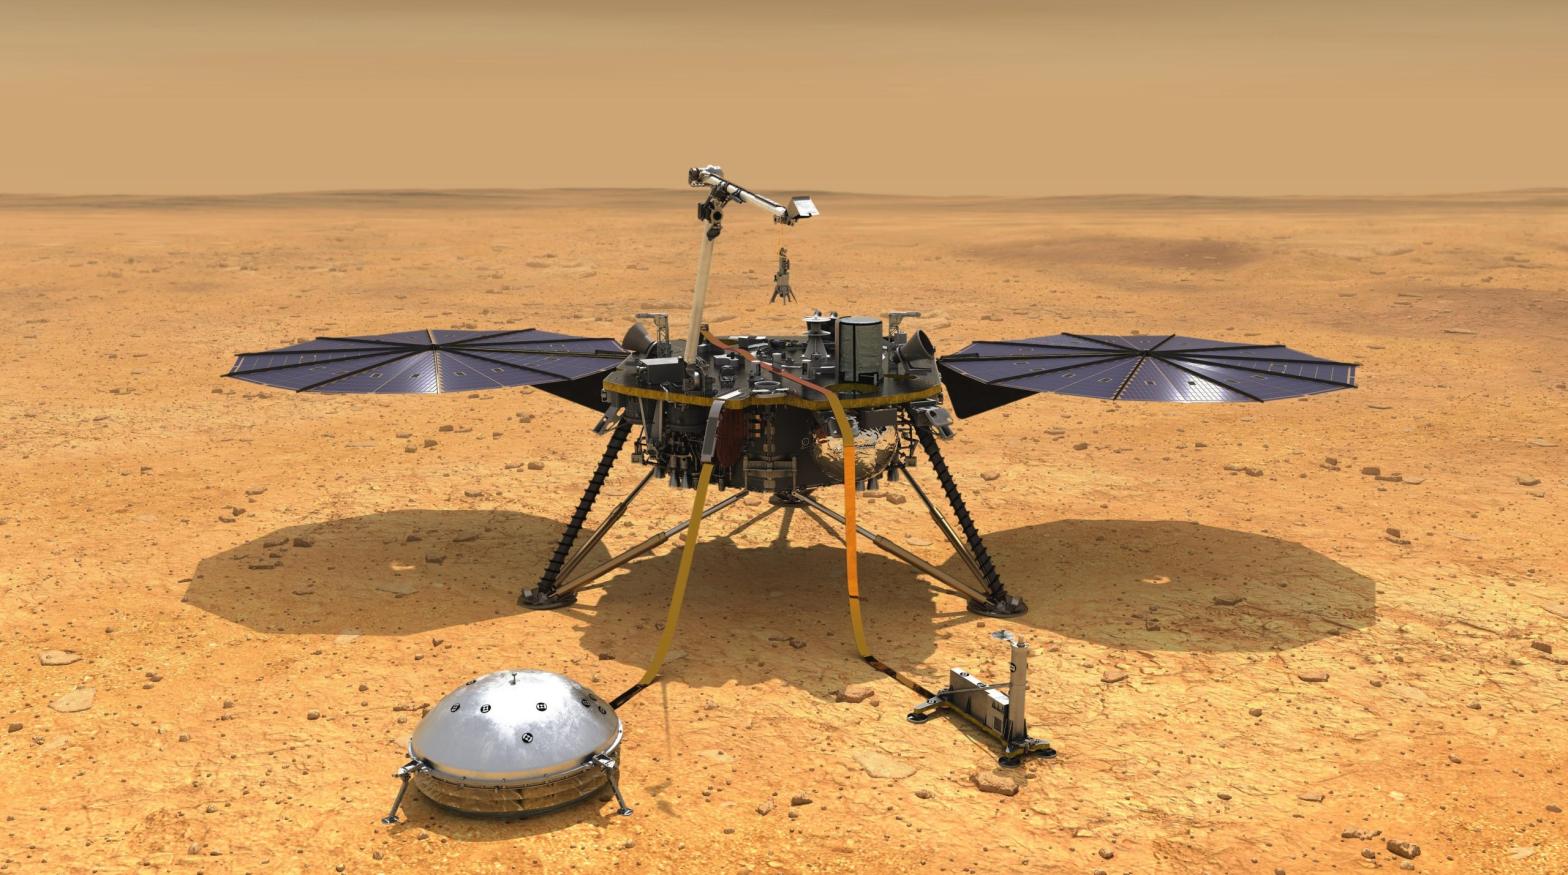 A mock-up of the InSight lander with its unfurled solar panels. (Illustration: NASA/JPL-Caltech)